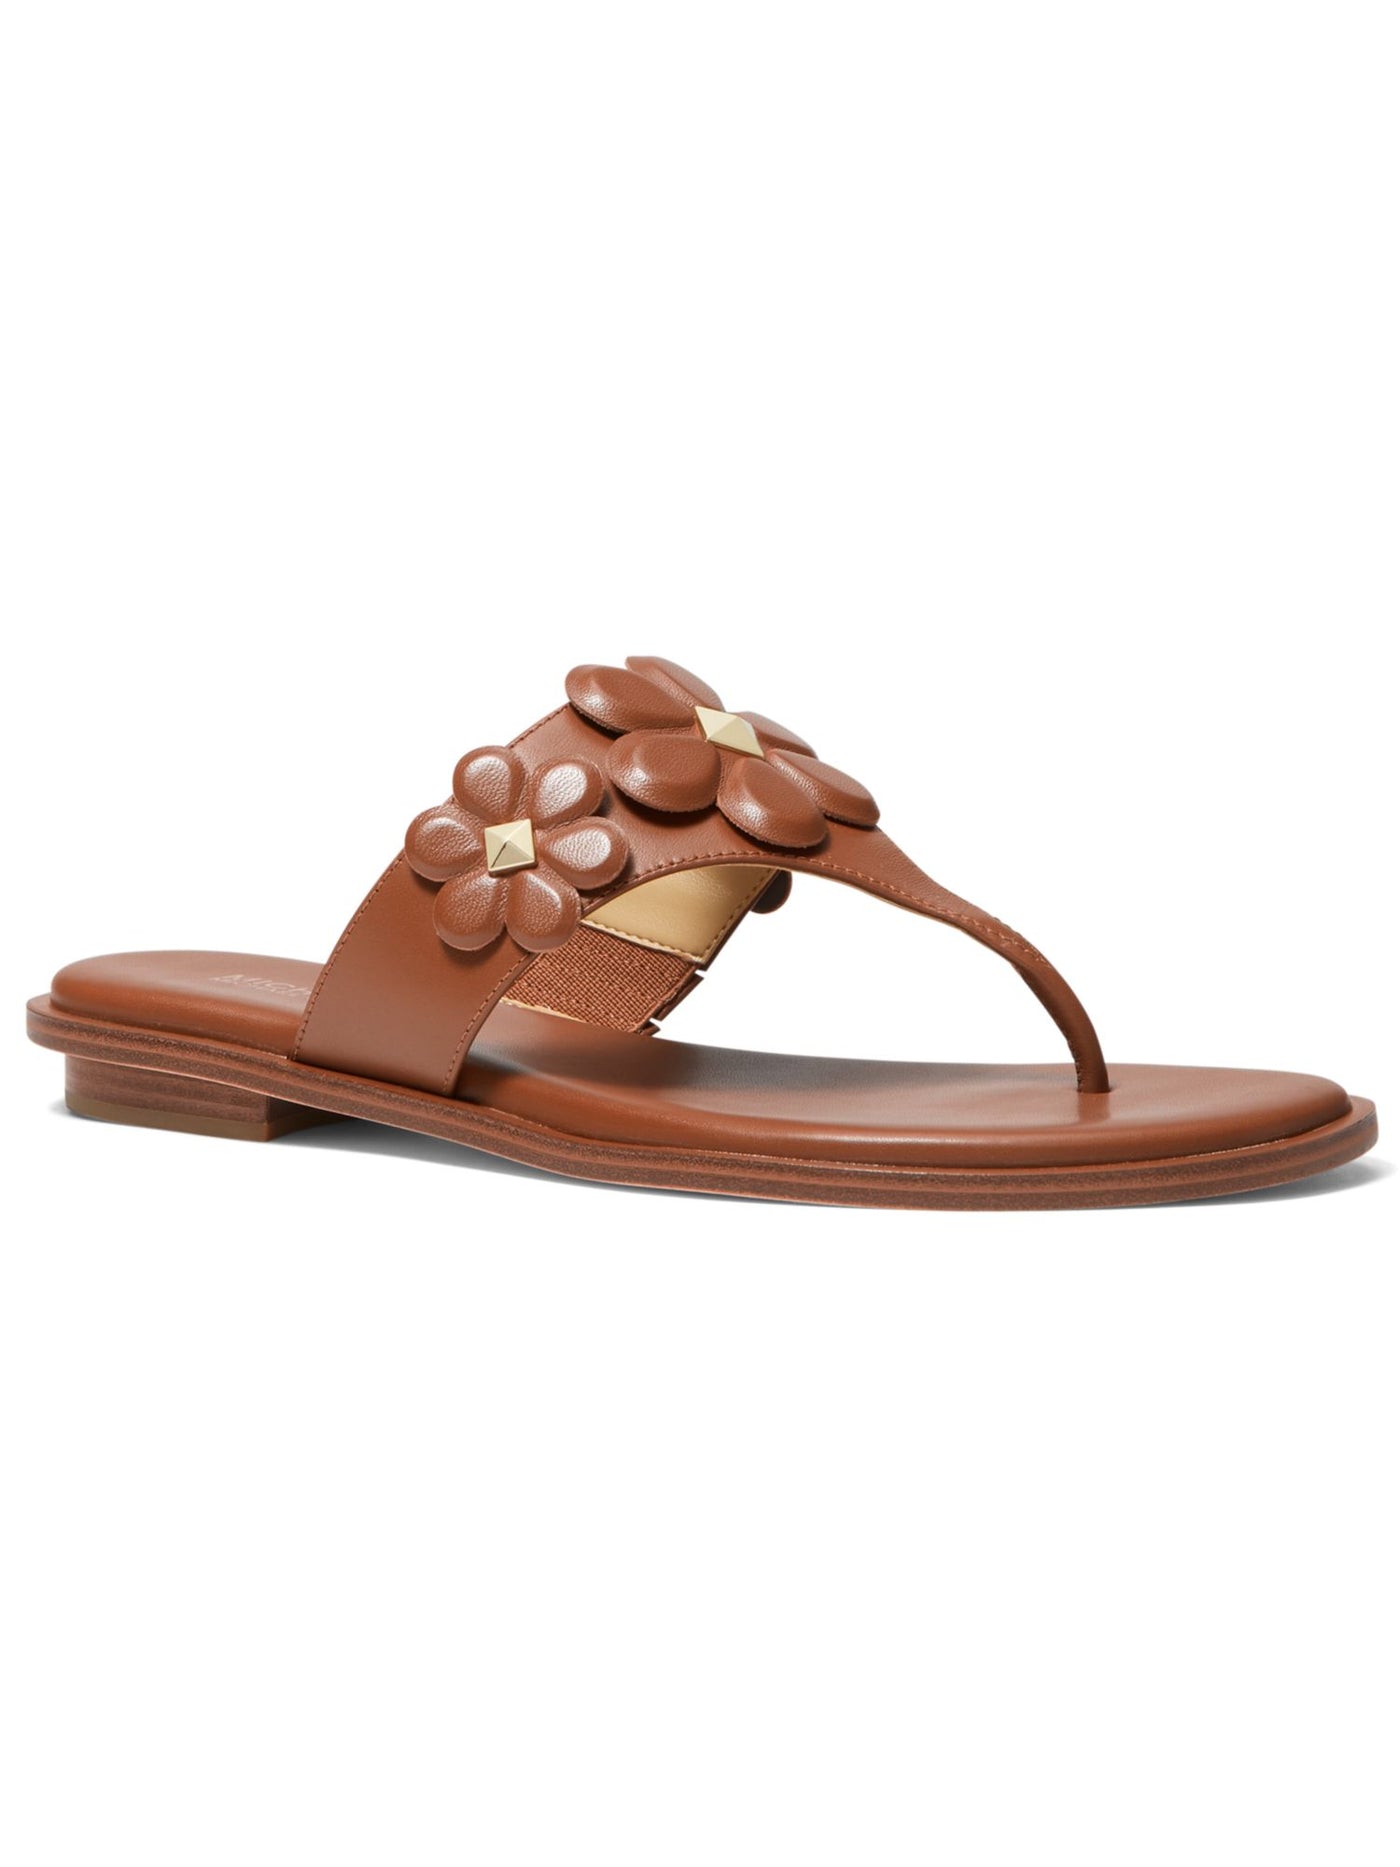 MICHAEL KORS Womens Brown Floral Accent Studded Padded Nellie Round Toe Block Heel Slip On Thong Sandals Shoes 8 M